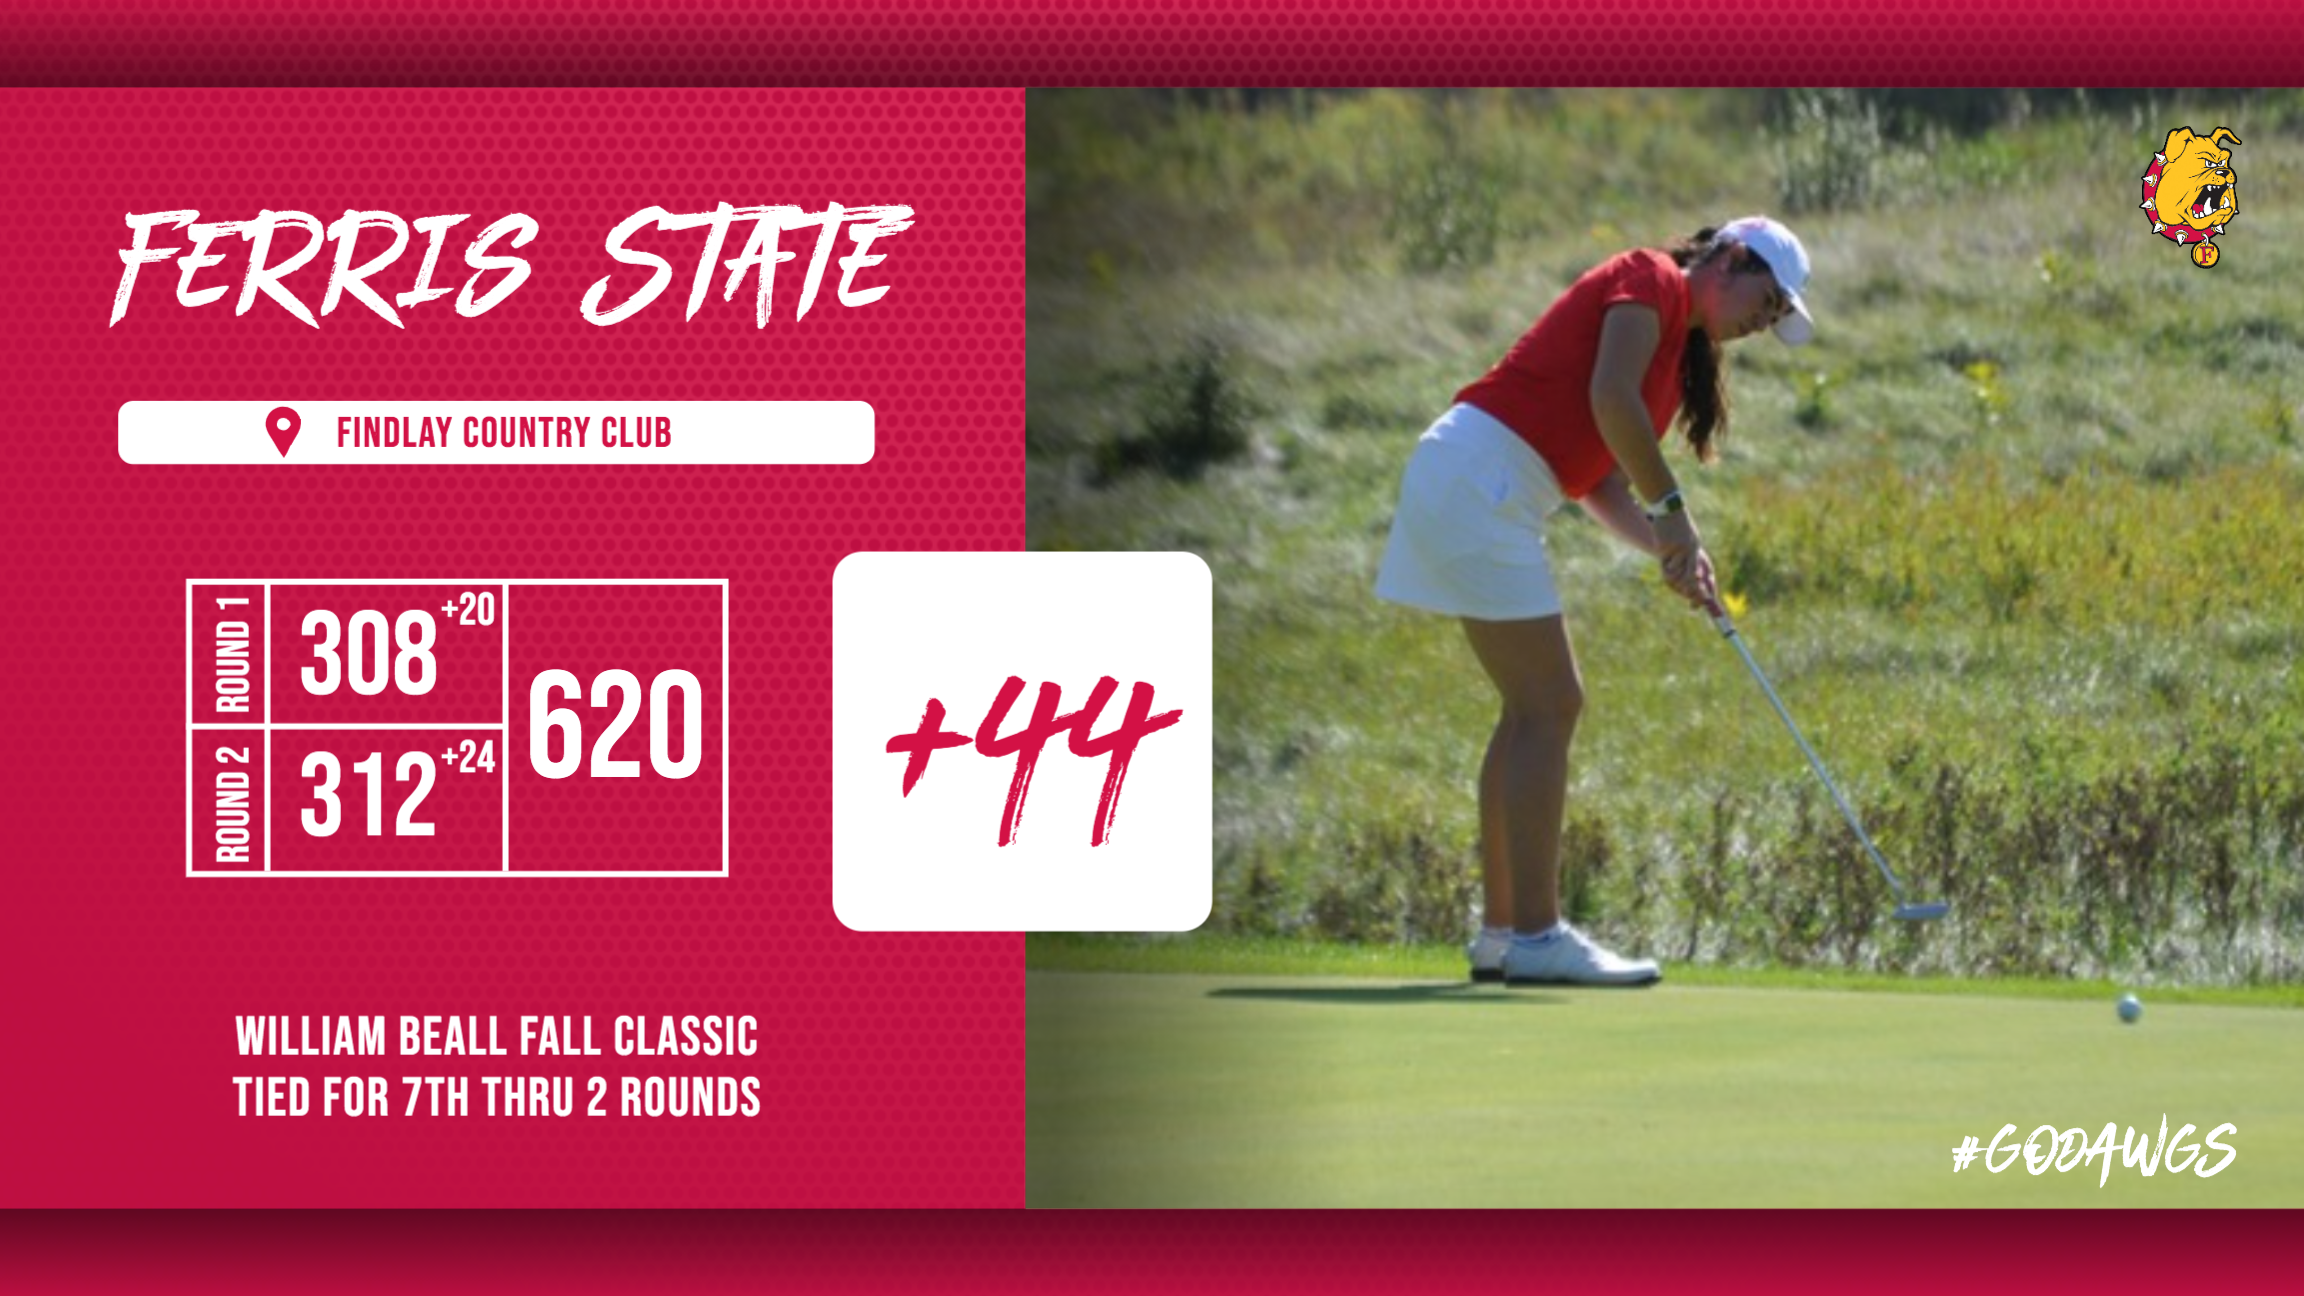 Women's Golf Notches Strong Start Thru Two Rounds At Beall Fall Classic In Findlay